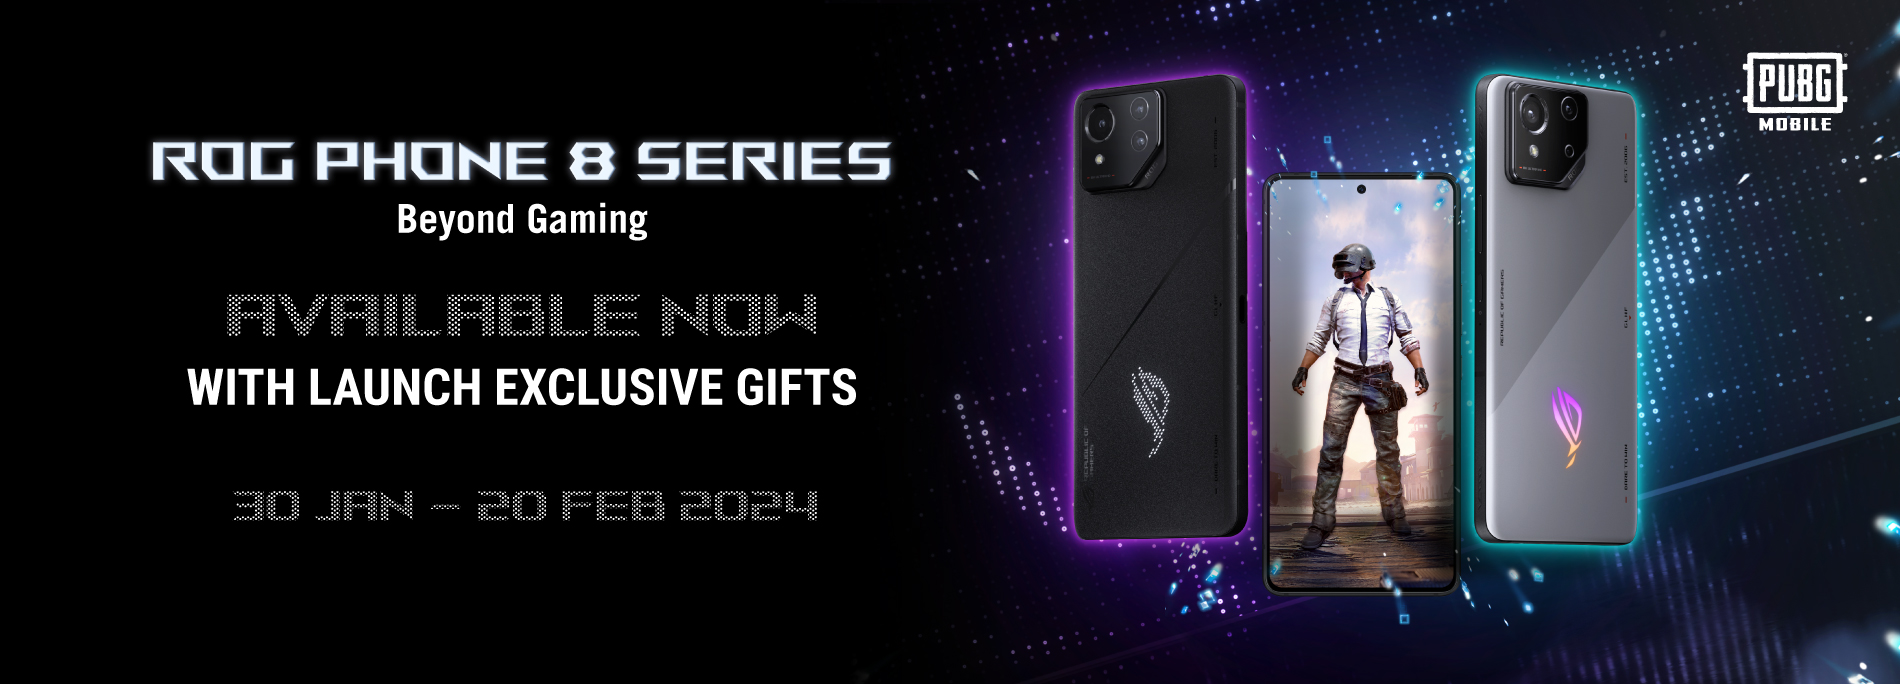 BUY ROG PHONE 8 SERIES | LAUNCH EXCLUSIVE GIFTS WORTH UP TO RM748!